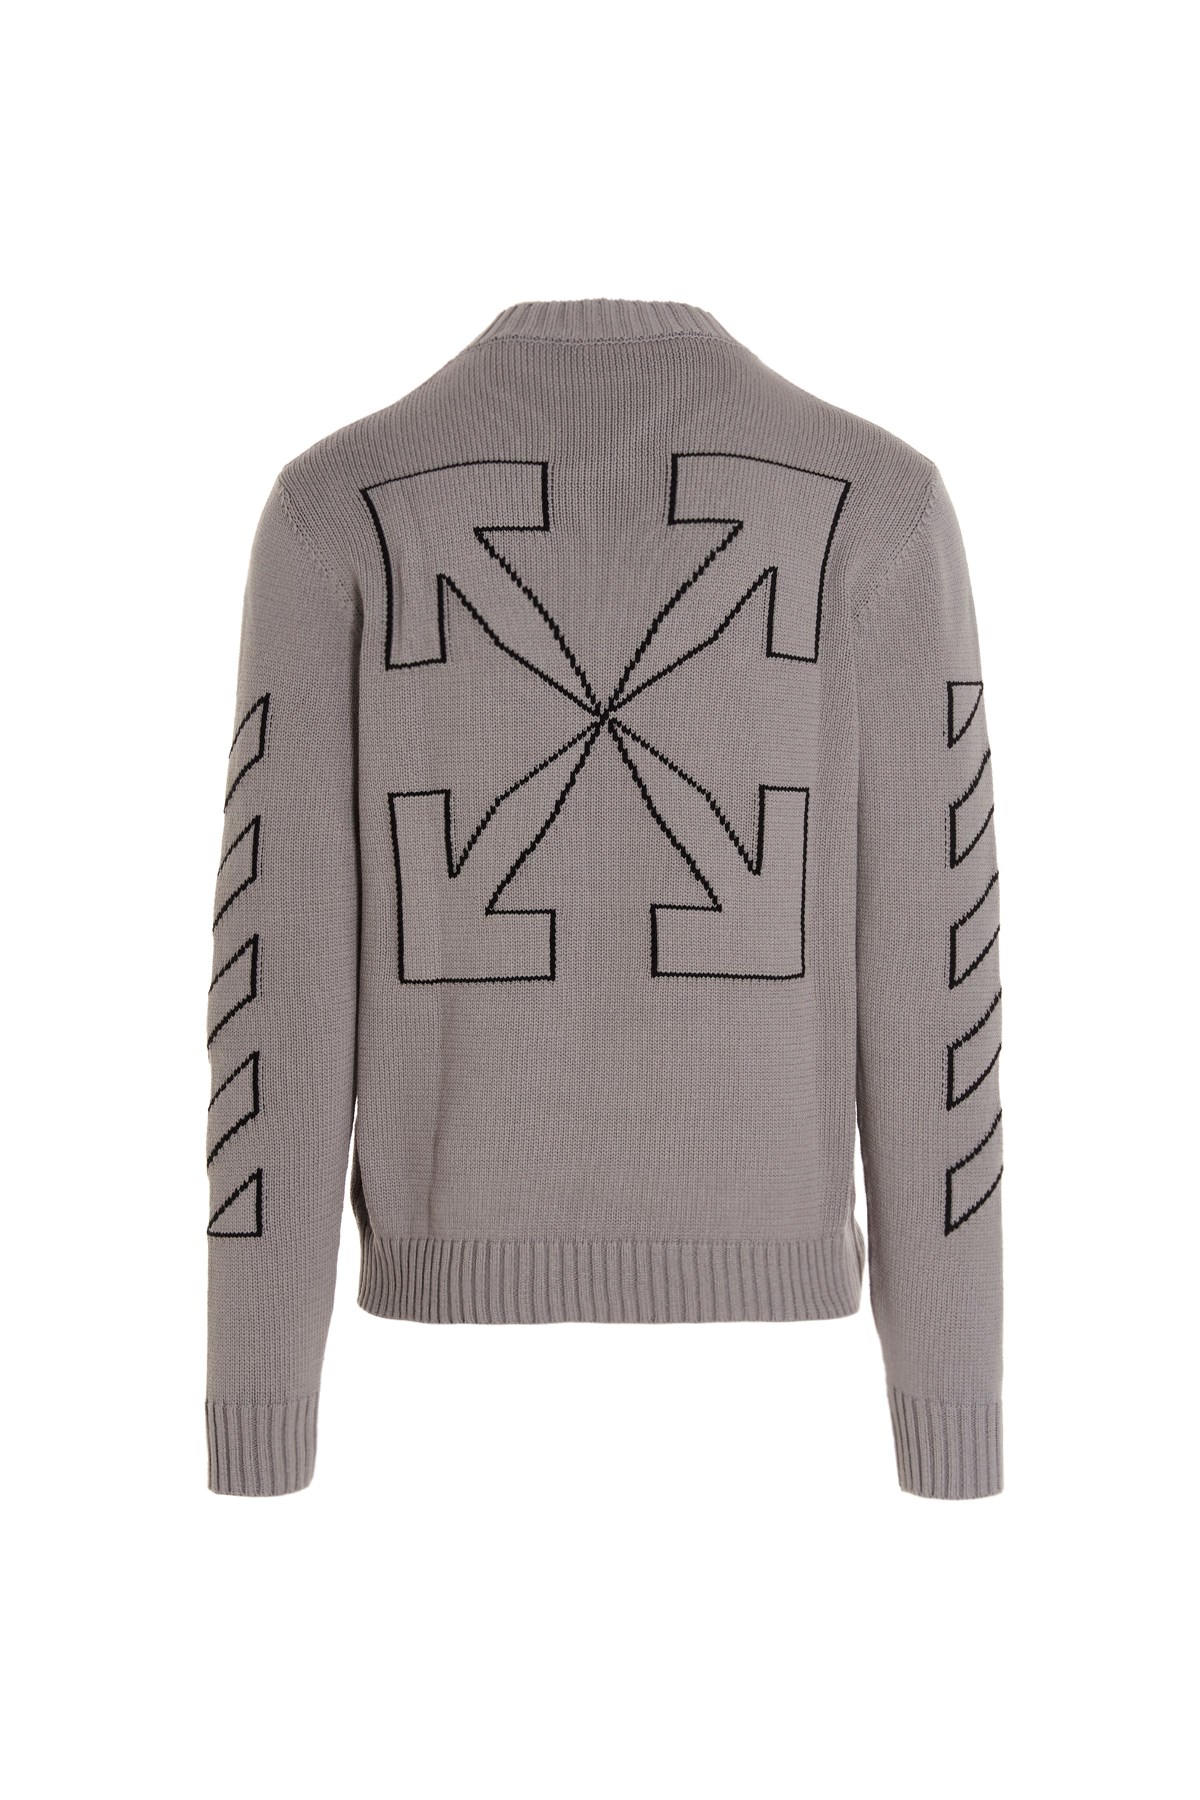 OFF-WHITE 'Diagonal Outline’ Sweater